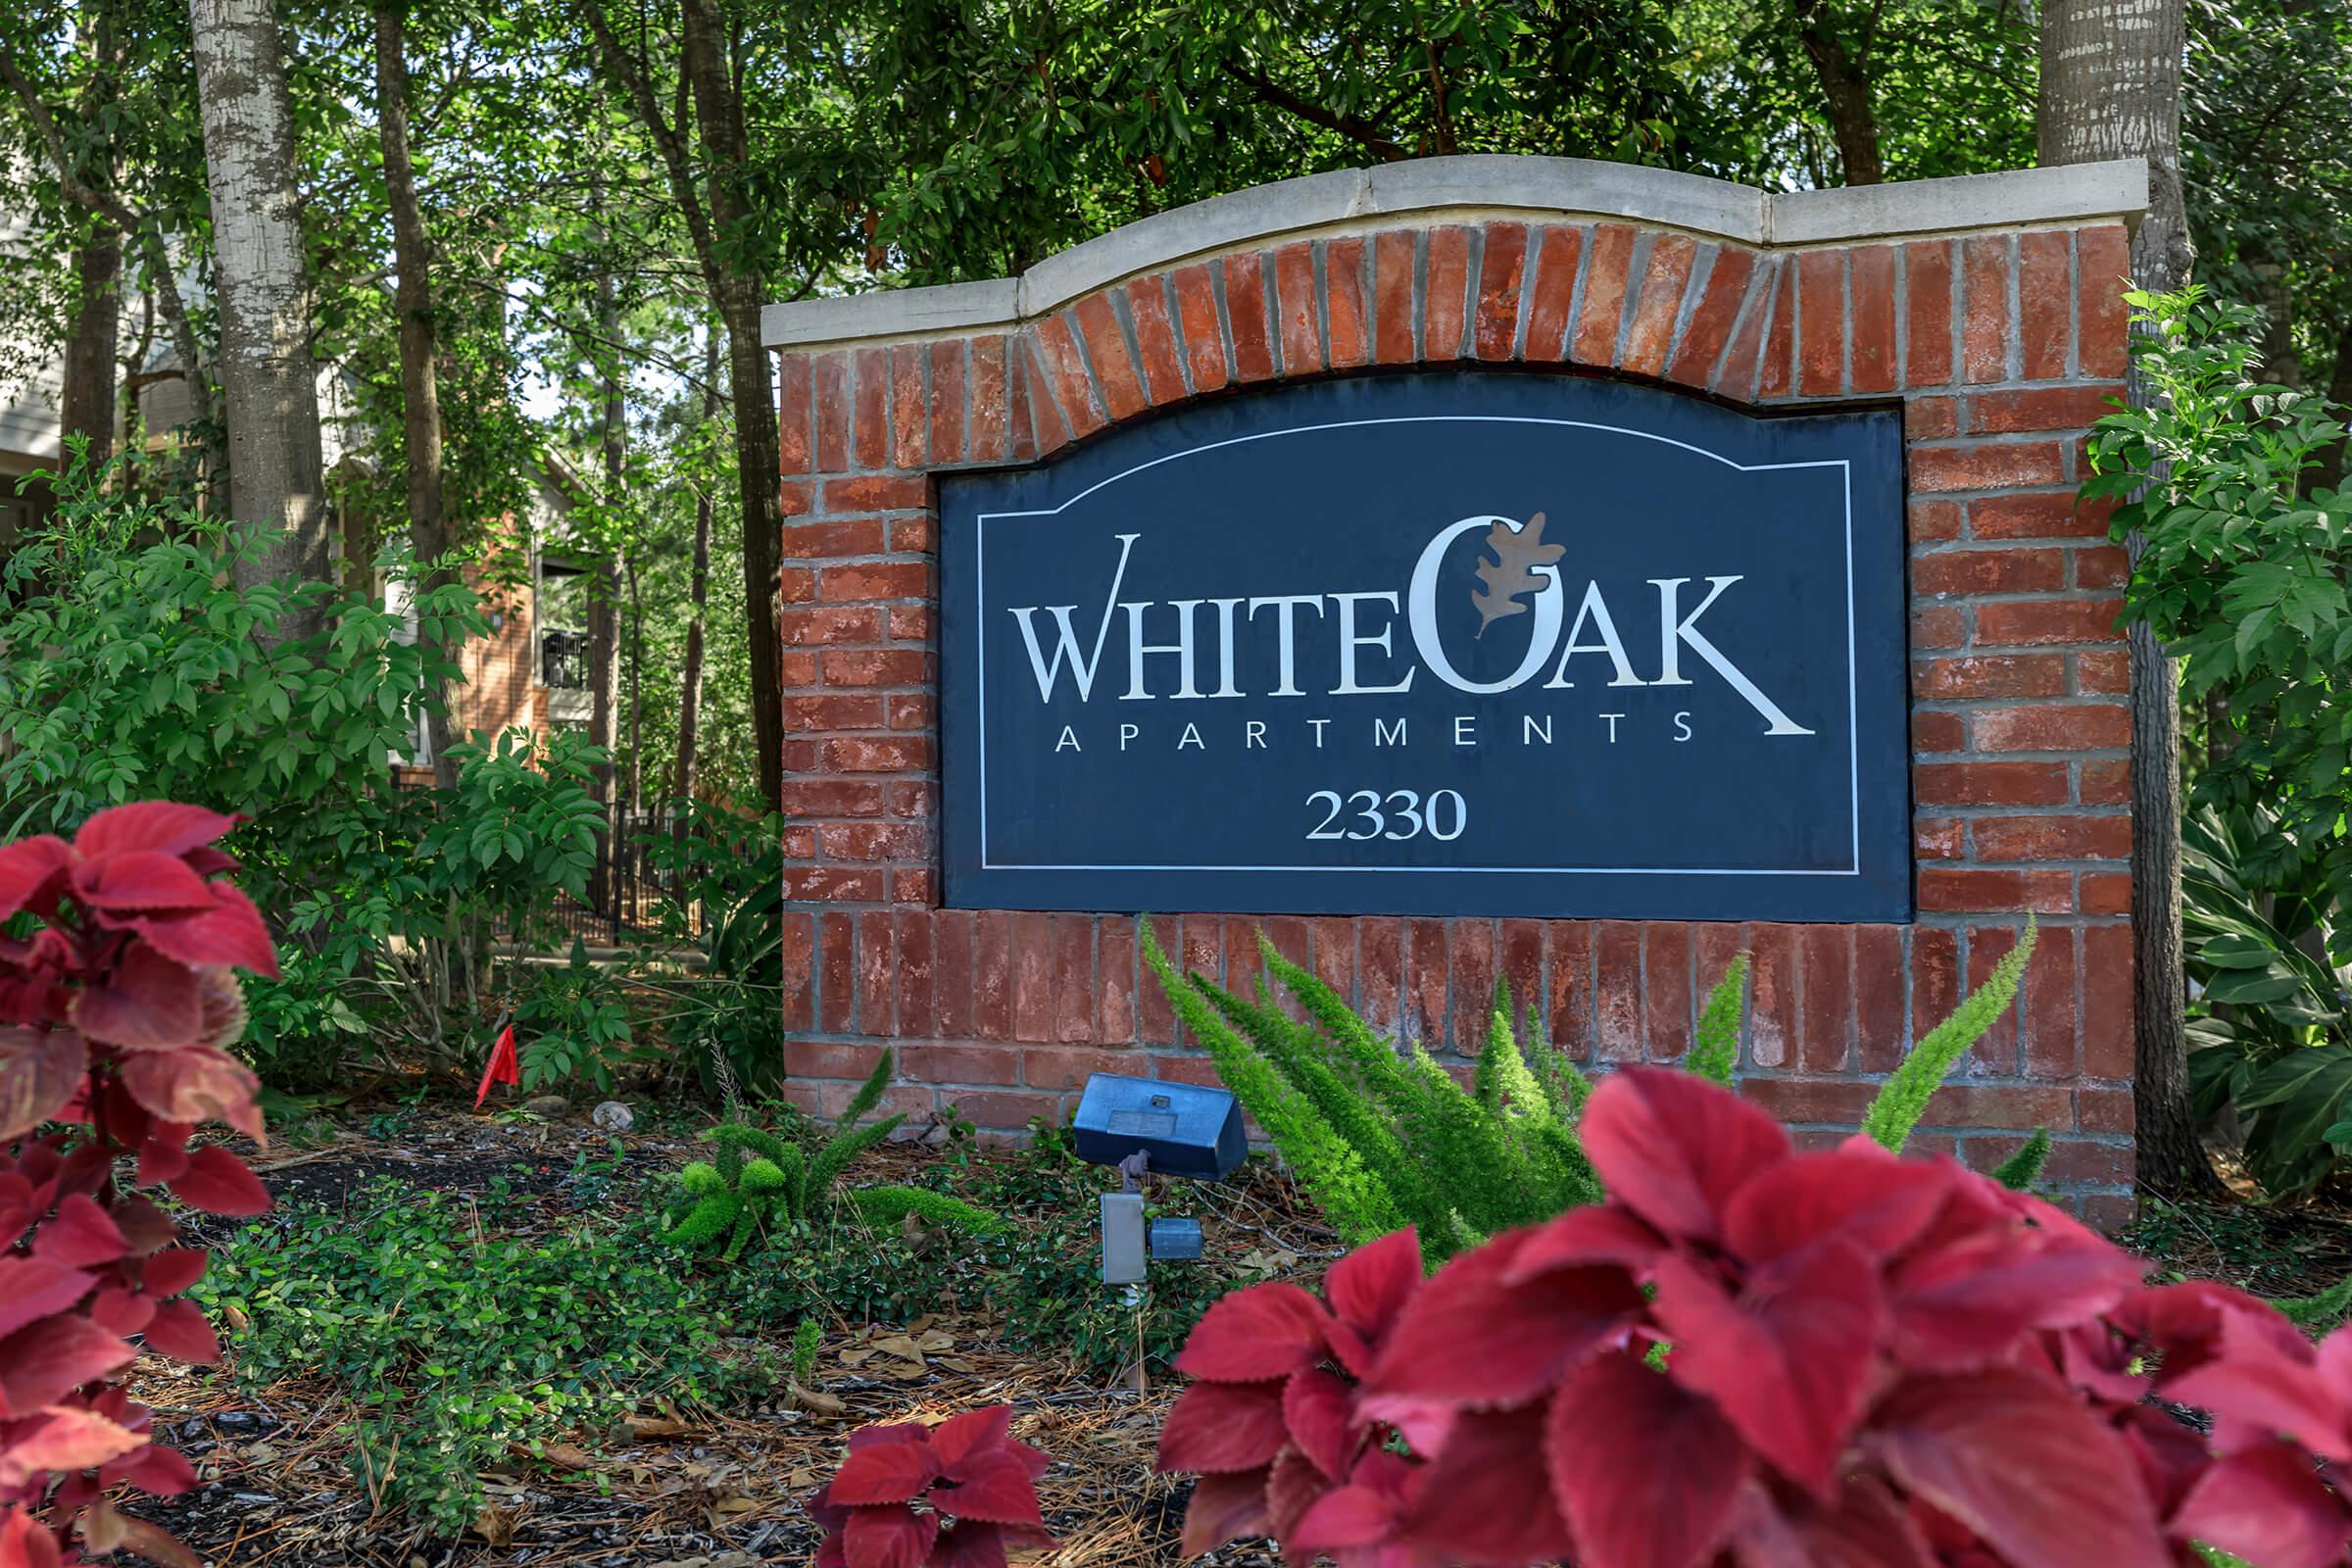 WHITE OAK HAS YOUR NEW APARTMENT HOME FOR RENT